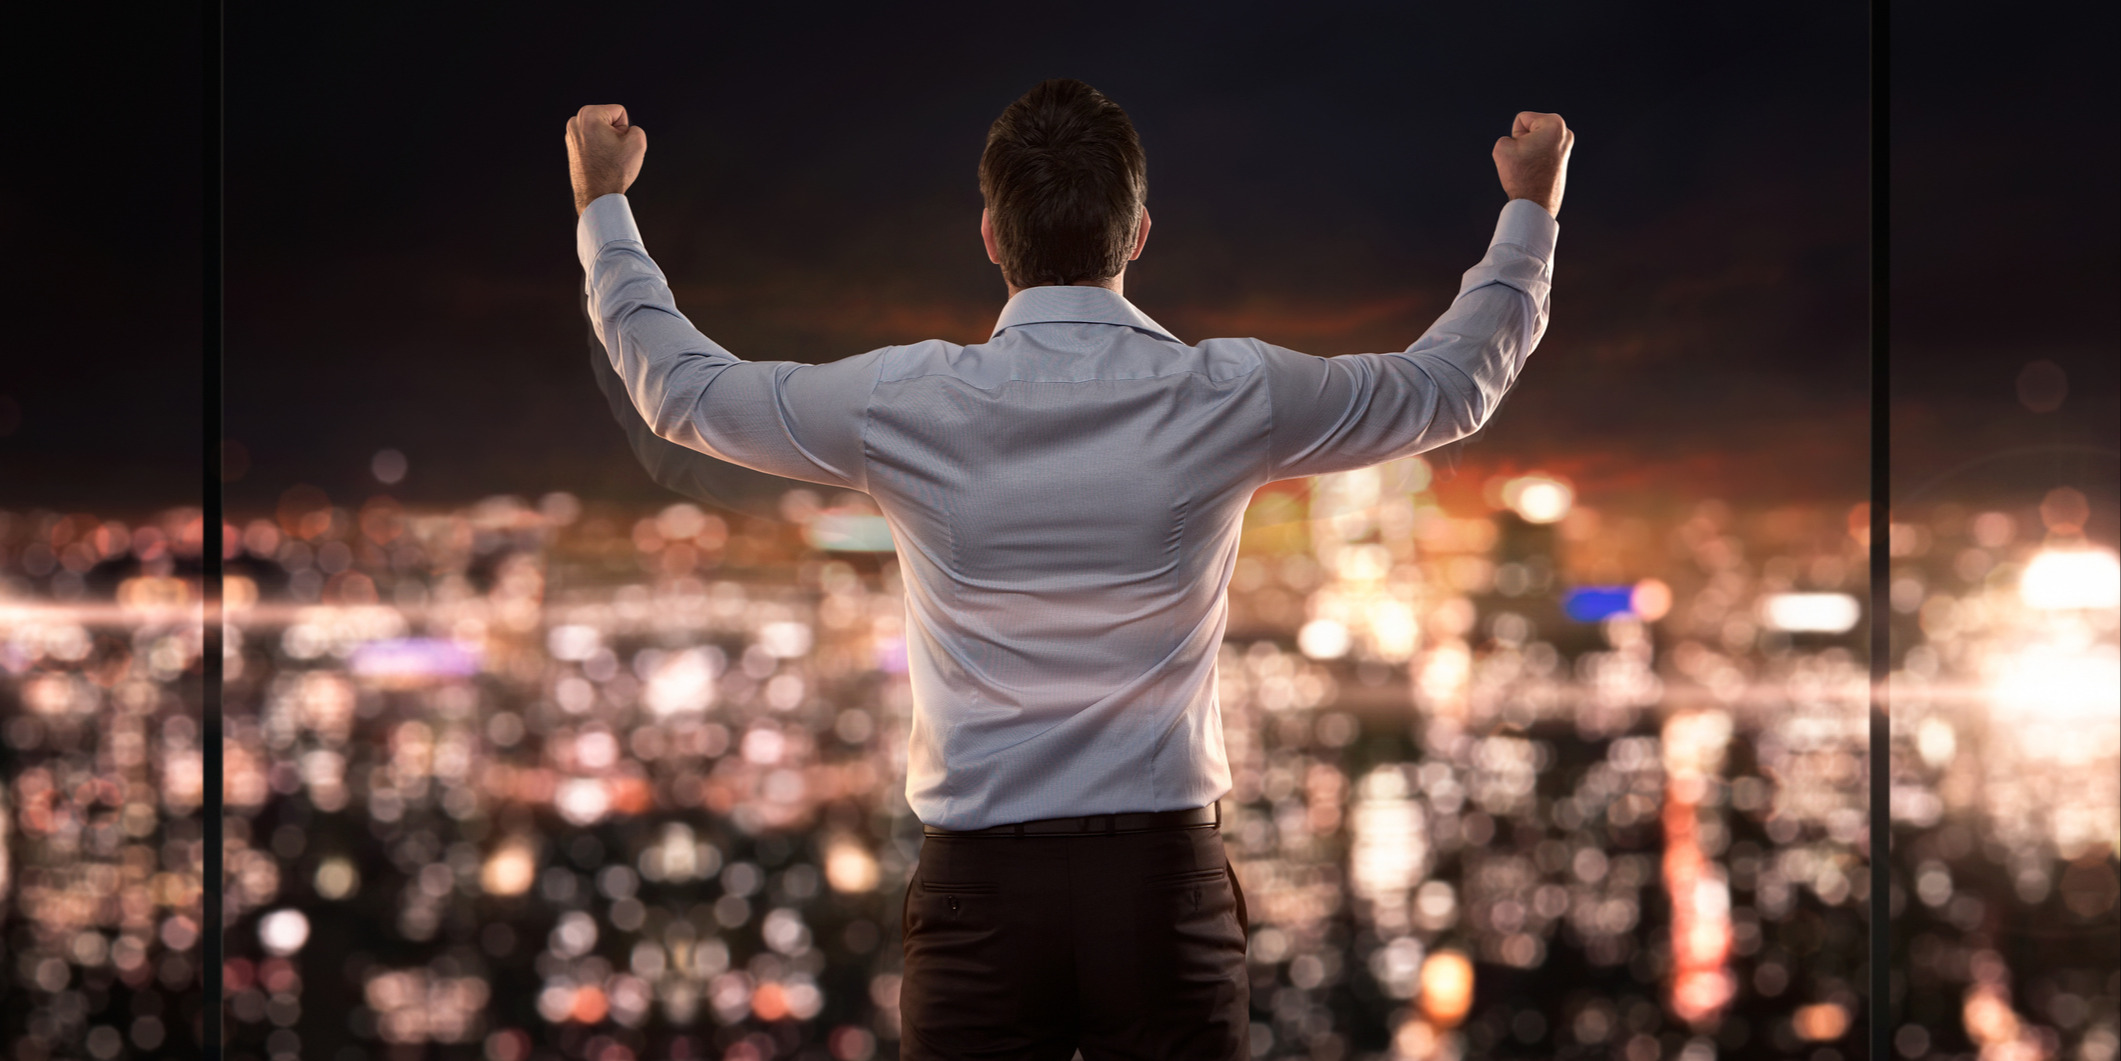 20 Motivational Videos for Your Sales Team